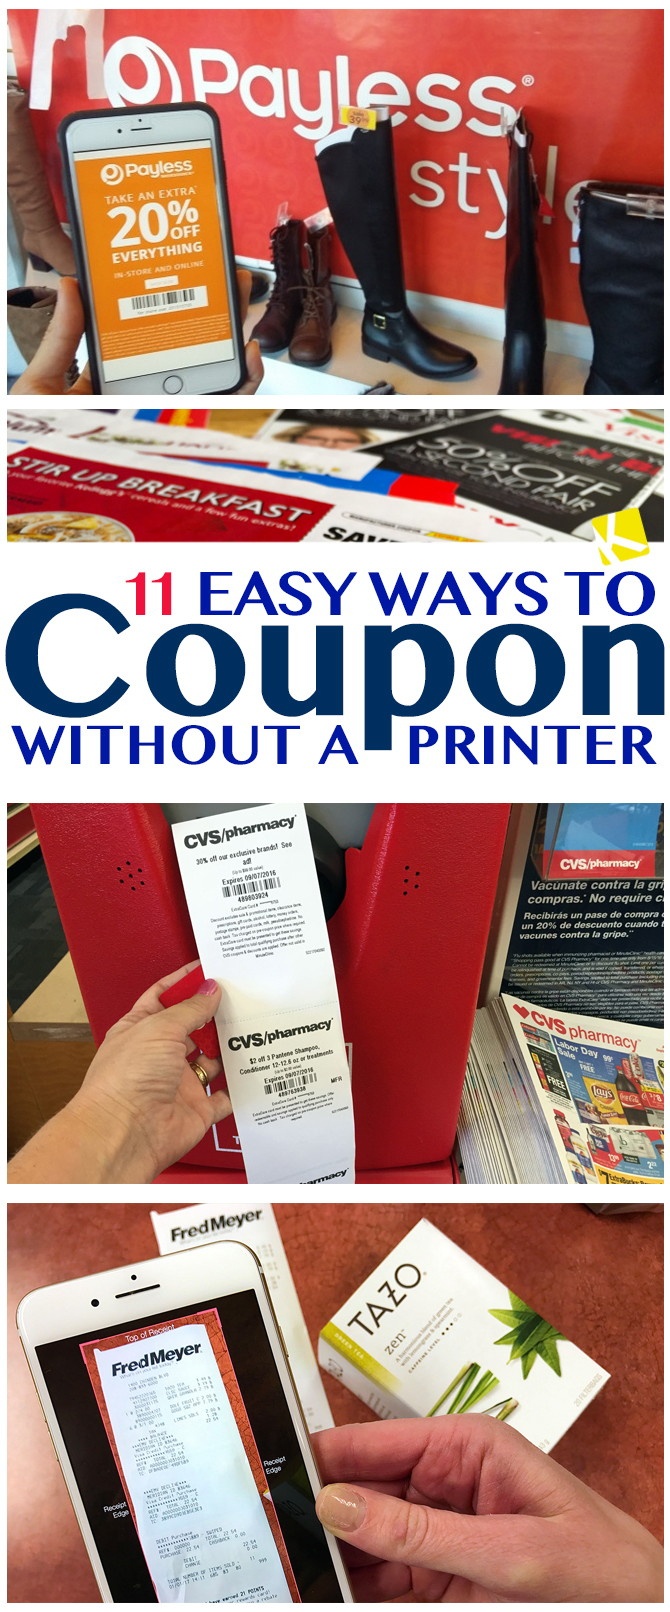 11 Easy Ways To Coupon Without A Printer - The Krazy Coupon Lady - Free Printable Coupons Without Downloading Coupon Printer